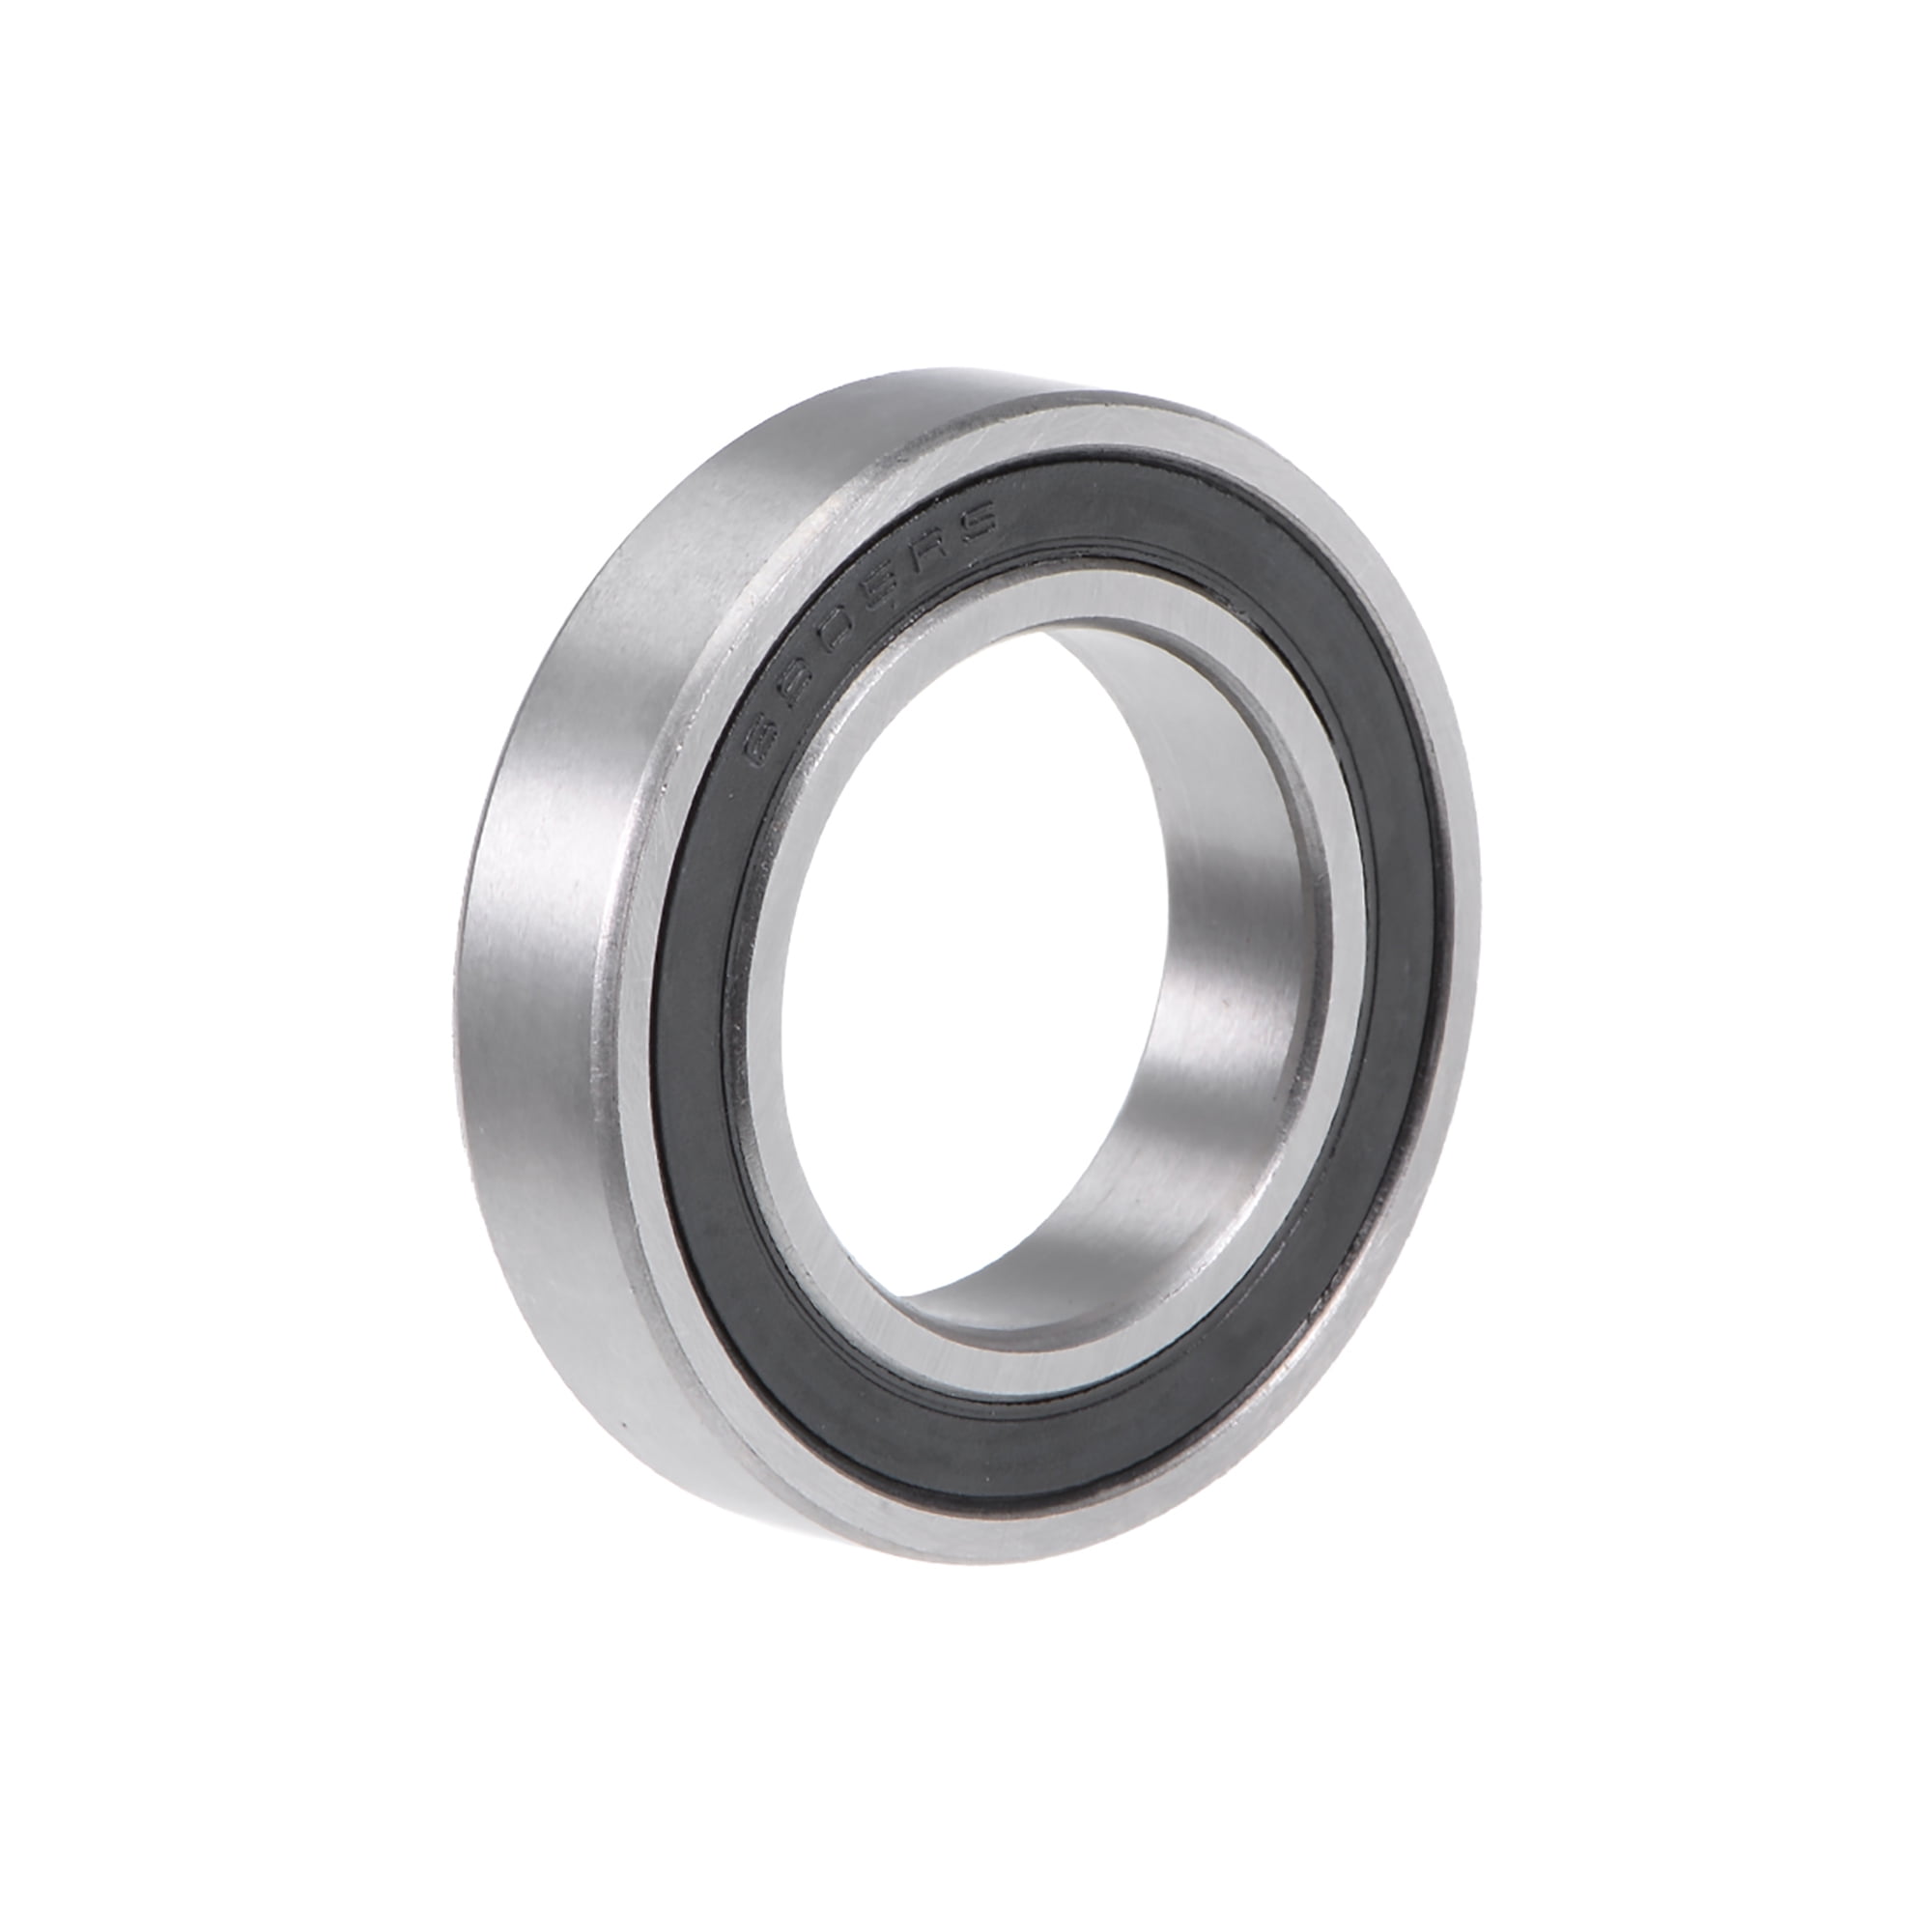 6905-2RS Radial/Deep Groove Ball Bearing 25mm x 42mm x 9mm Rubber Seal 1-Pack 